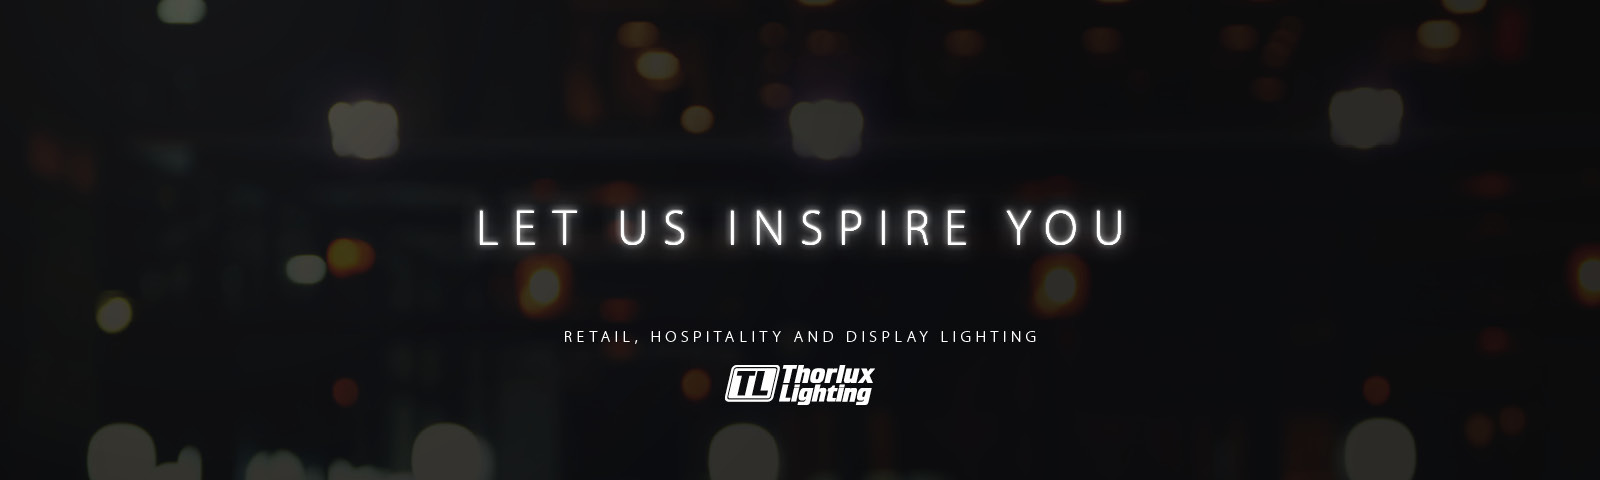 Retail, hospitality and display lighting solutions